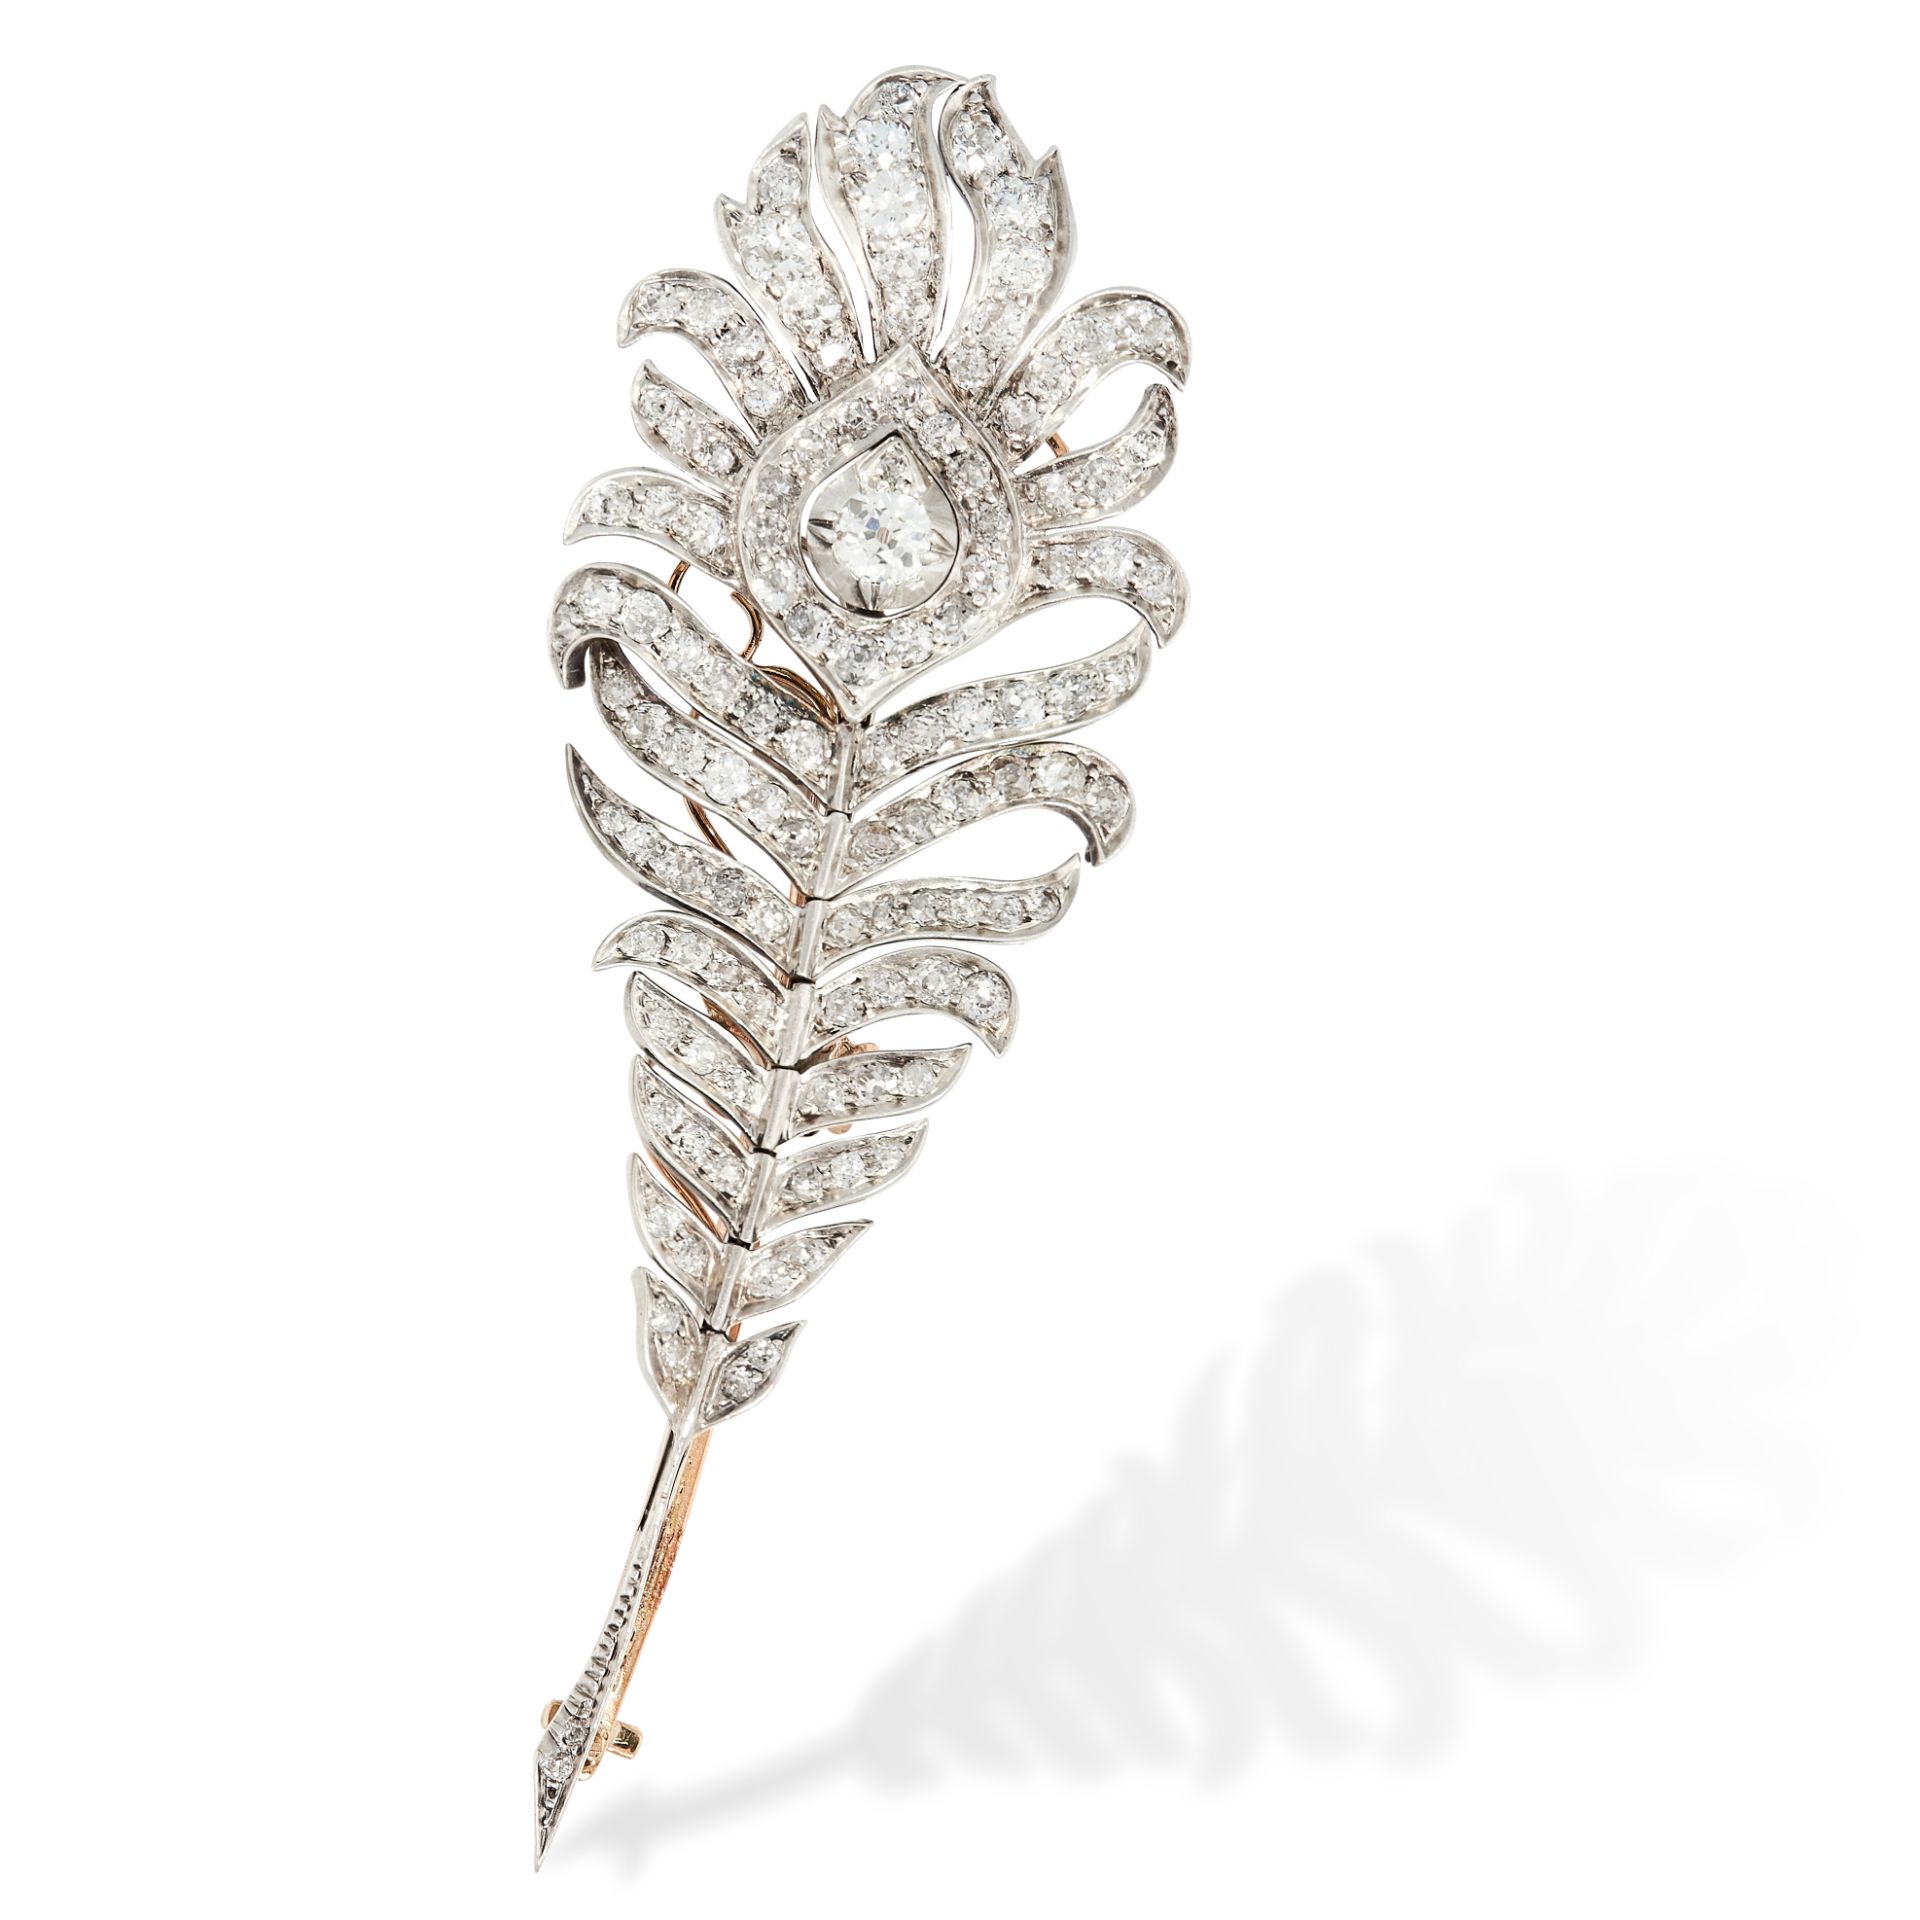 A DIAMOND PEACOCK FEATHER BROOCH in yellow gold (with rhodium plating), designed as the tail feather